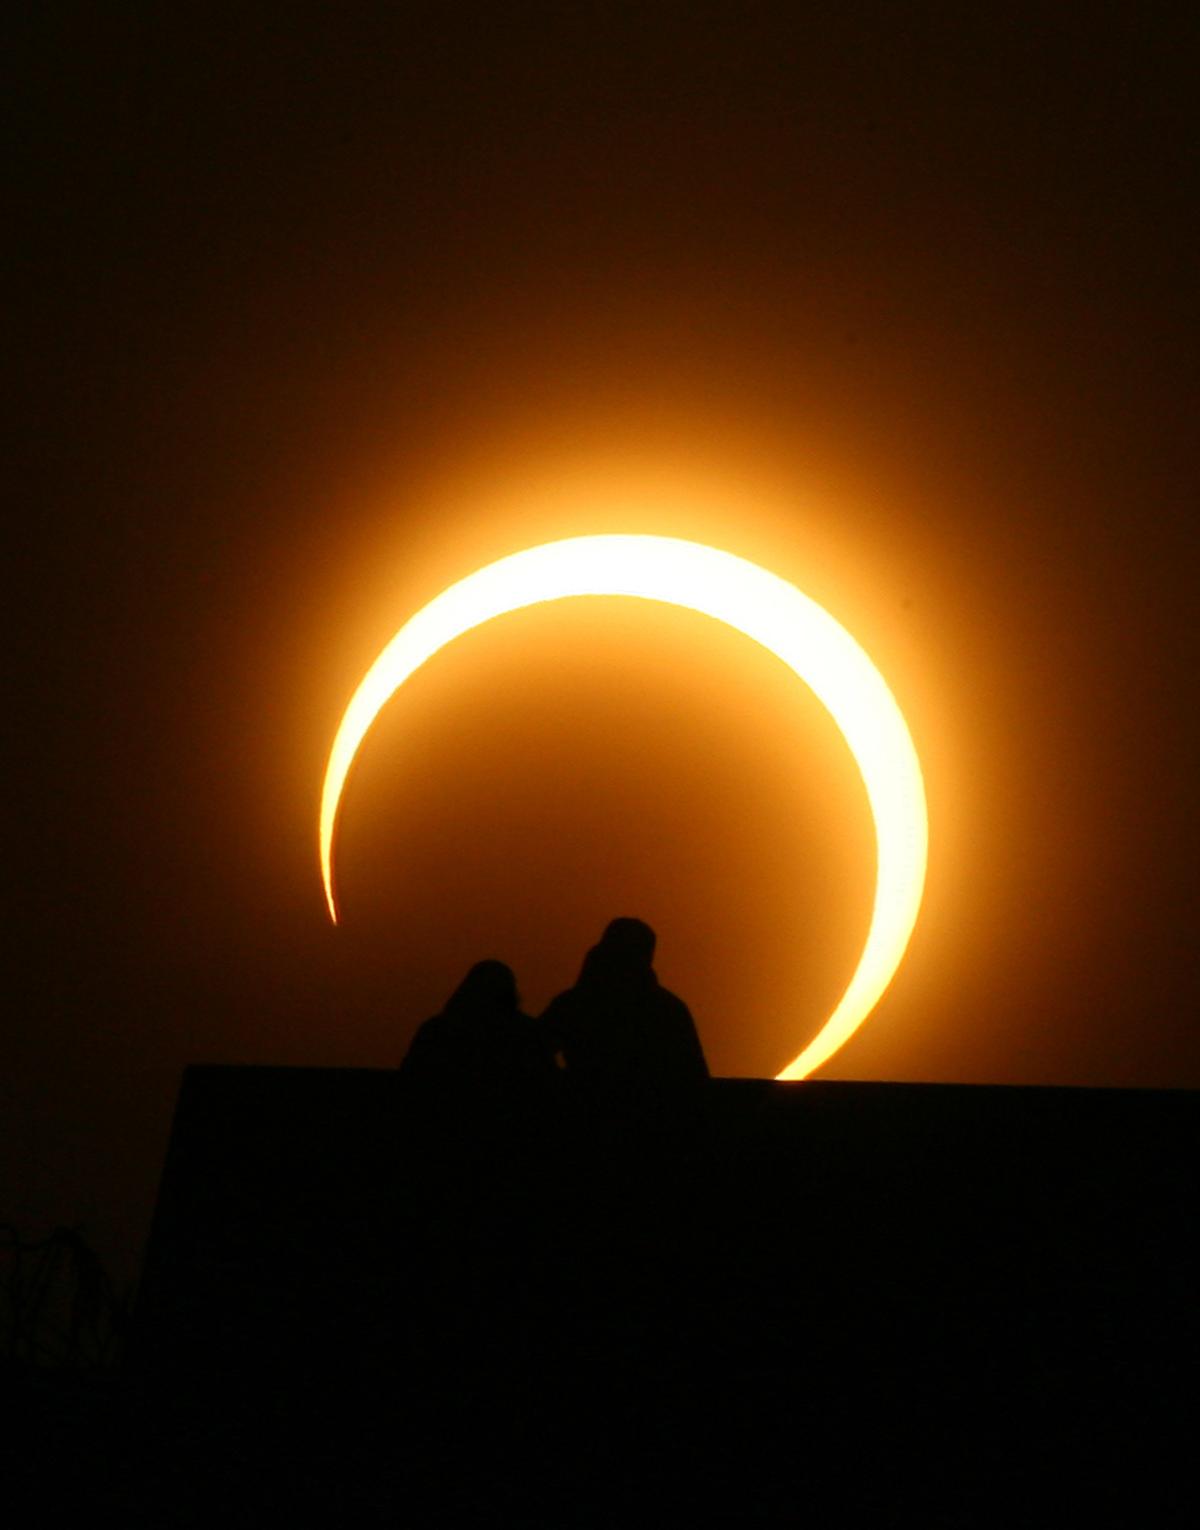 A couple watches the solar eclipse over Zhengzhou in central China's Henan province on Jan. 15, 2010. (STR/AFP via Getty Images)